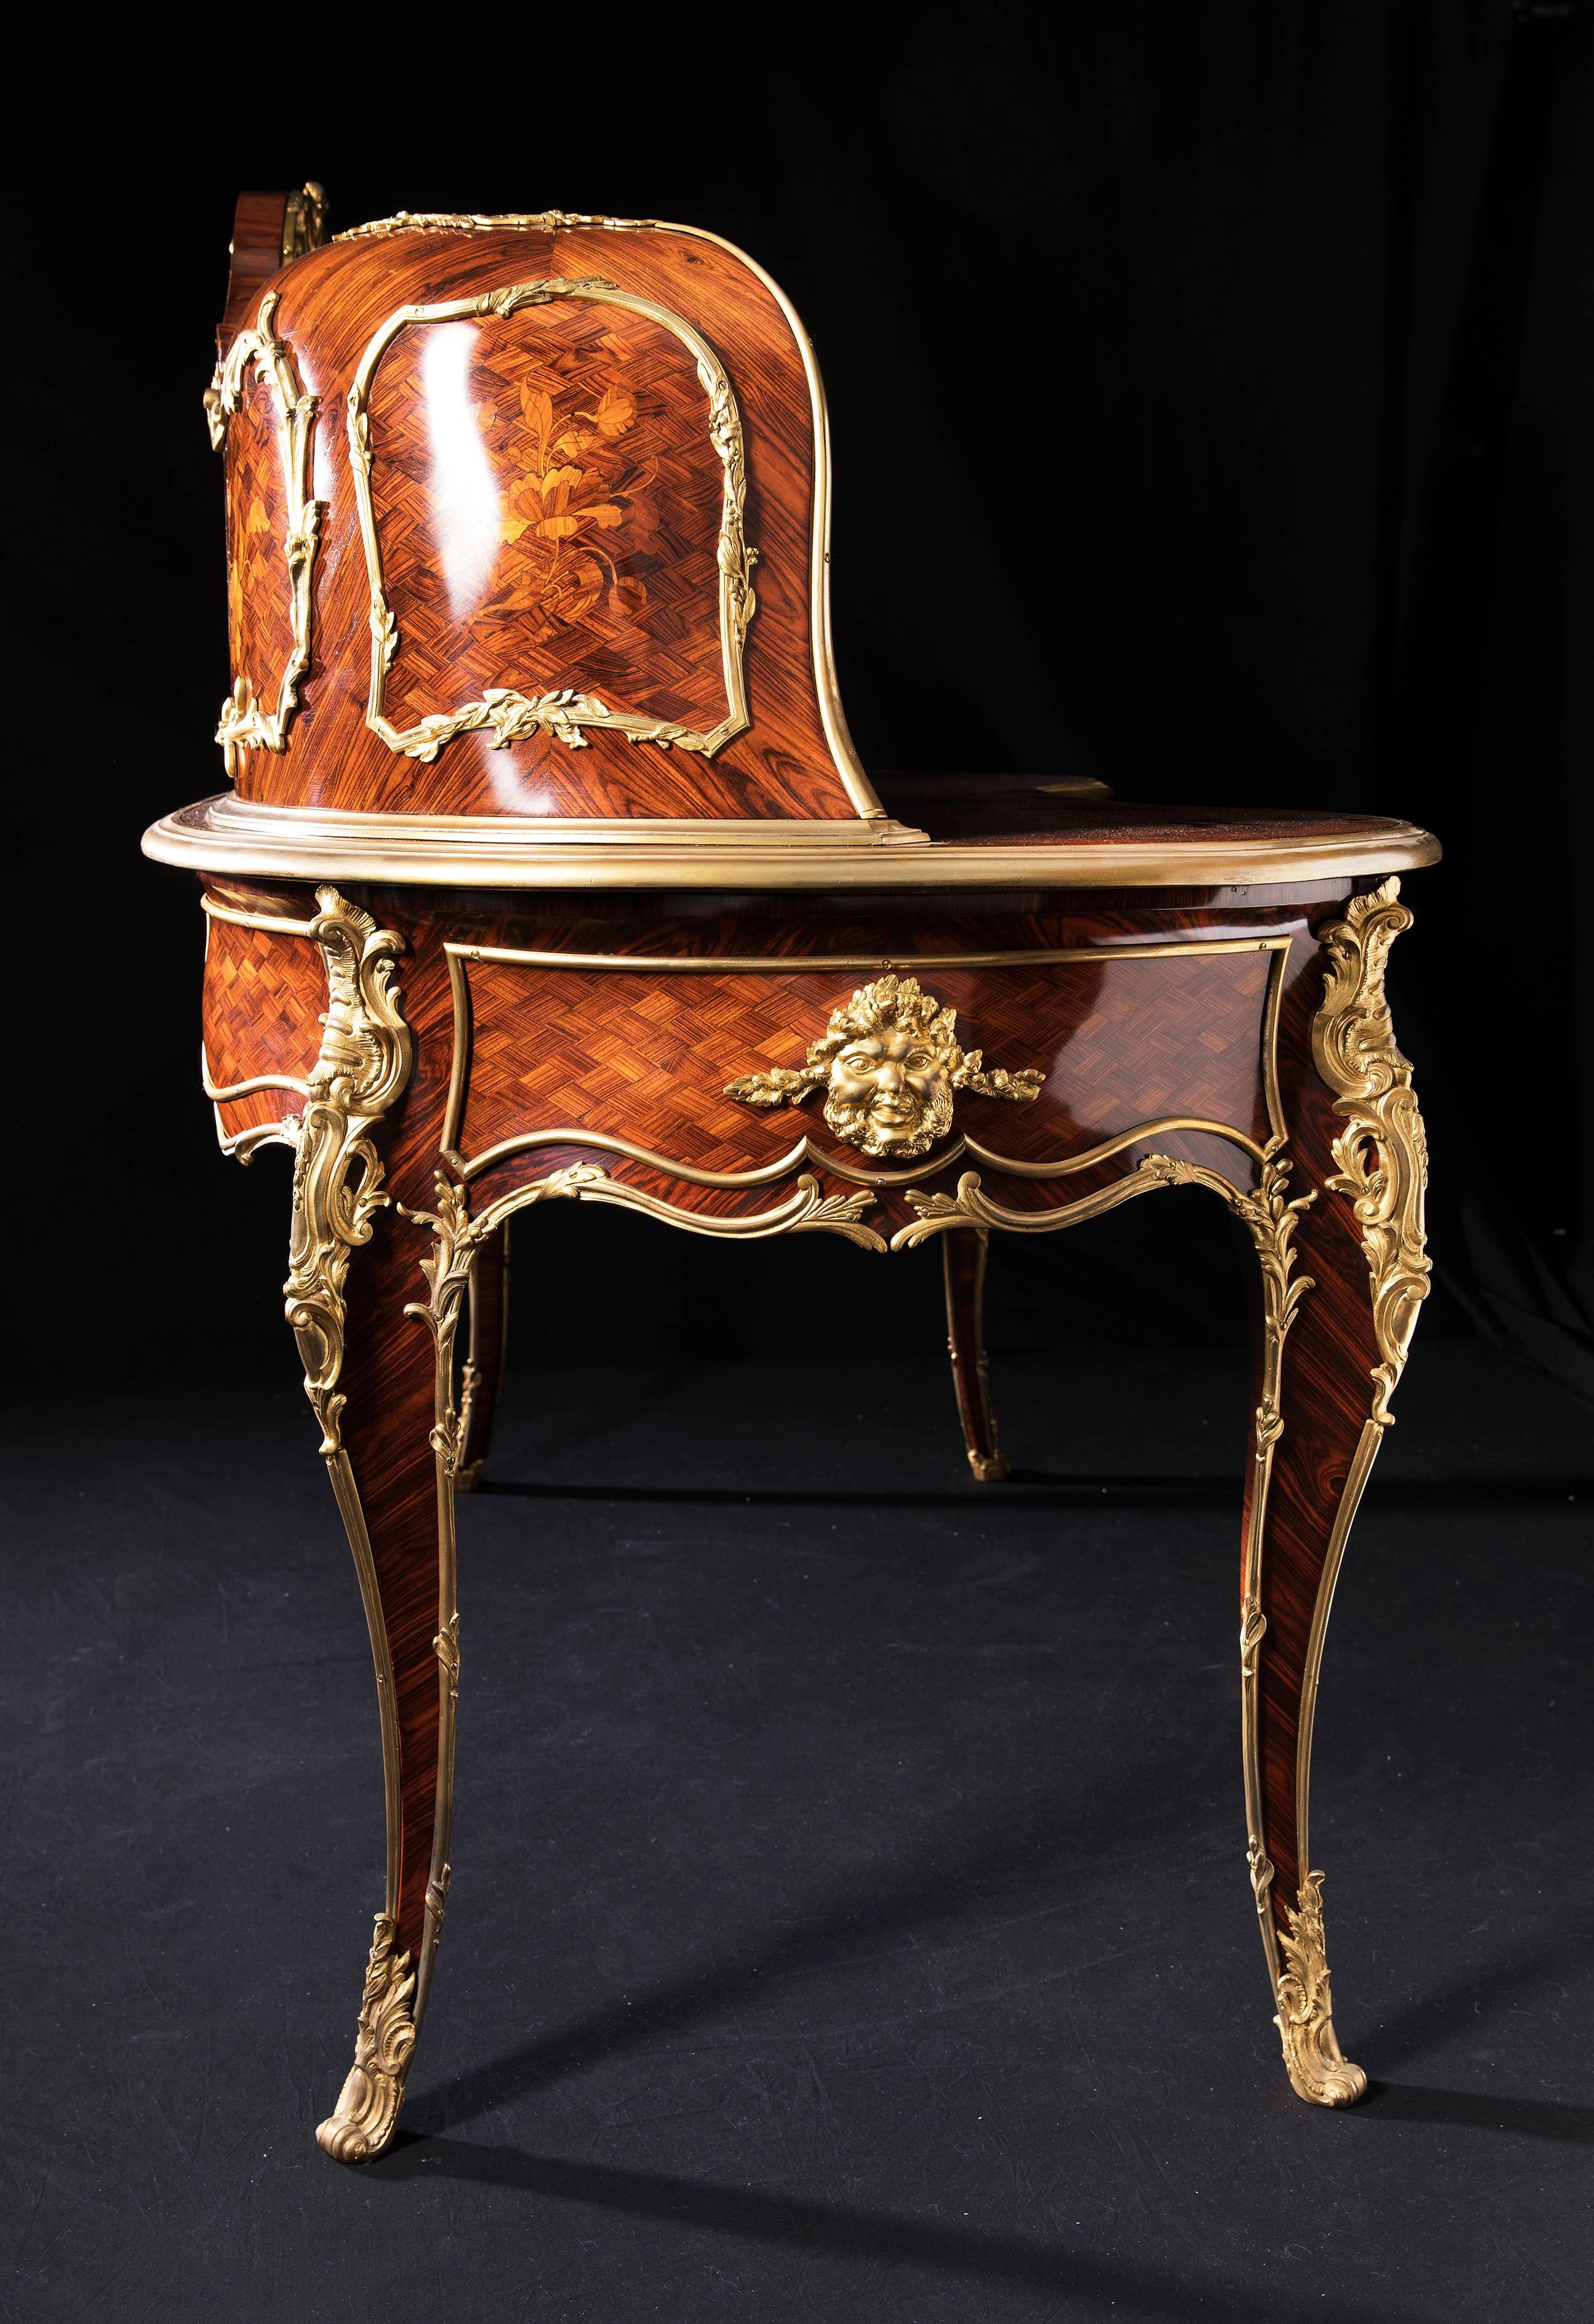 A gilt bronze-mounted kingwood parquetry and fruitwood floral marquetry bureau rognon after Paul Charles Sormani, 
early 20th century.
The upper structure centered by a clock and flanked by two cupboard doors opening to a satine and ebony cube